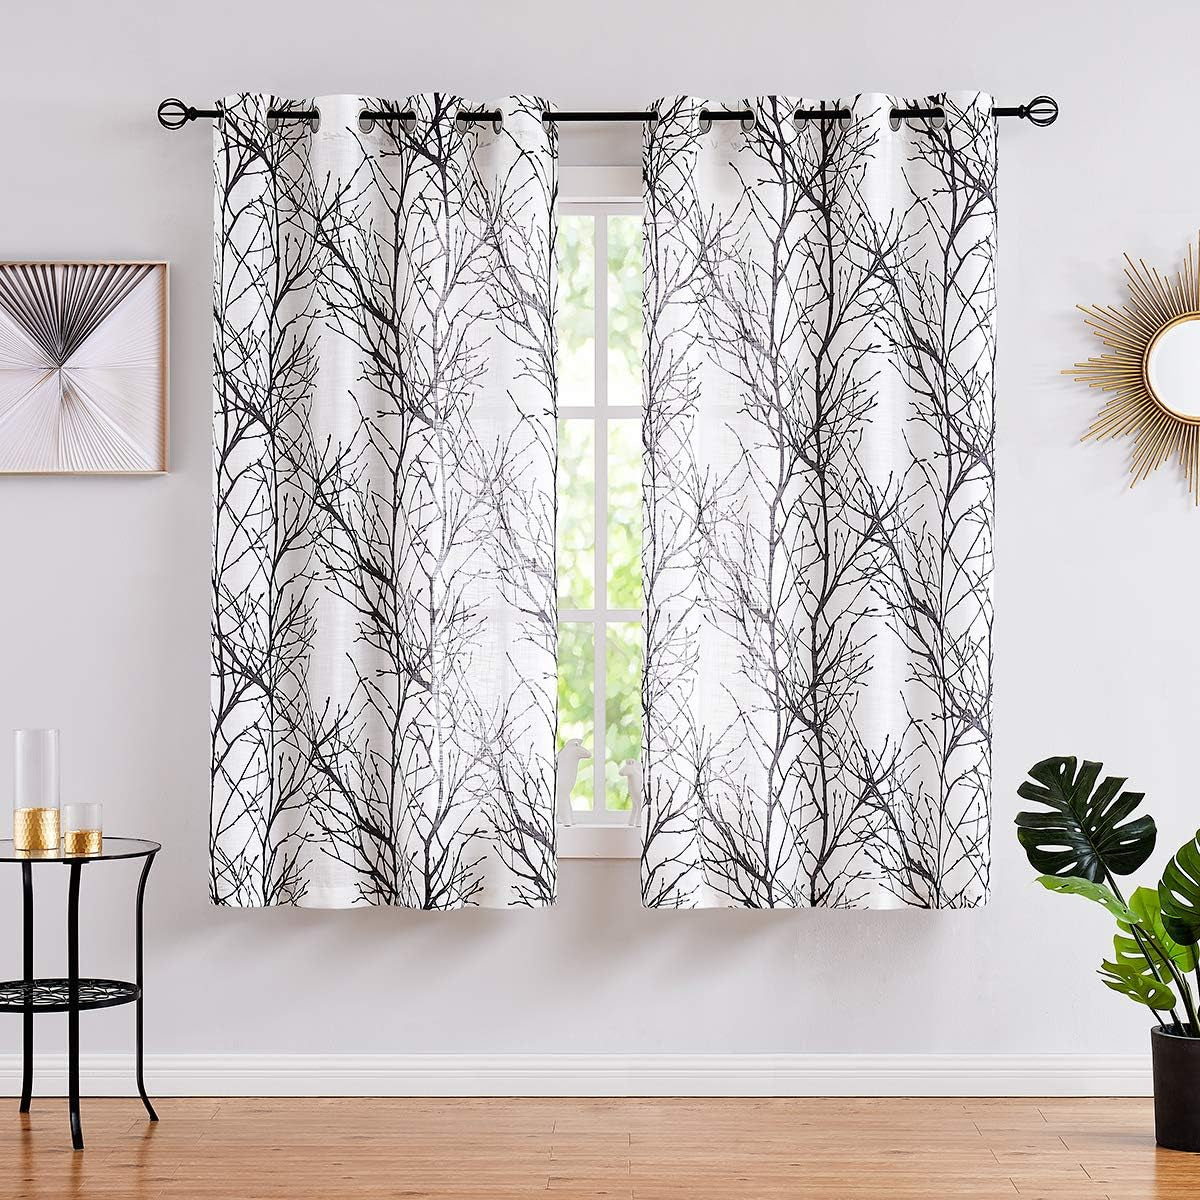 FMFUNCTEX Blue White Curtains for Kitchen Living Room 72“ Grey Tree Branches Print Curtain Set for Small Windows Linen Textured Semi-Sheer Drapes for Bedroom Grommet Top, 2 Panels  Fmfunctex Black 50" X 45" |2Pcs 